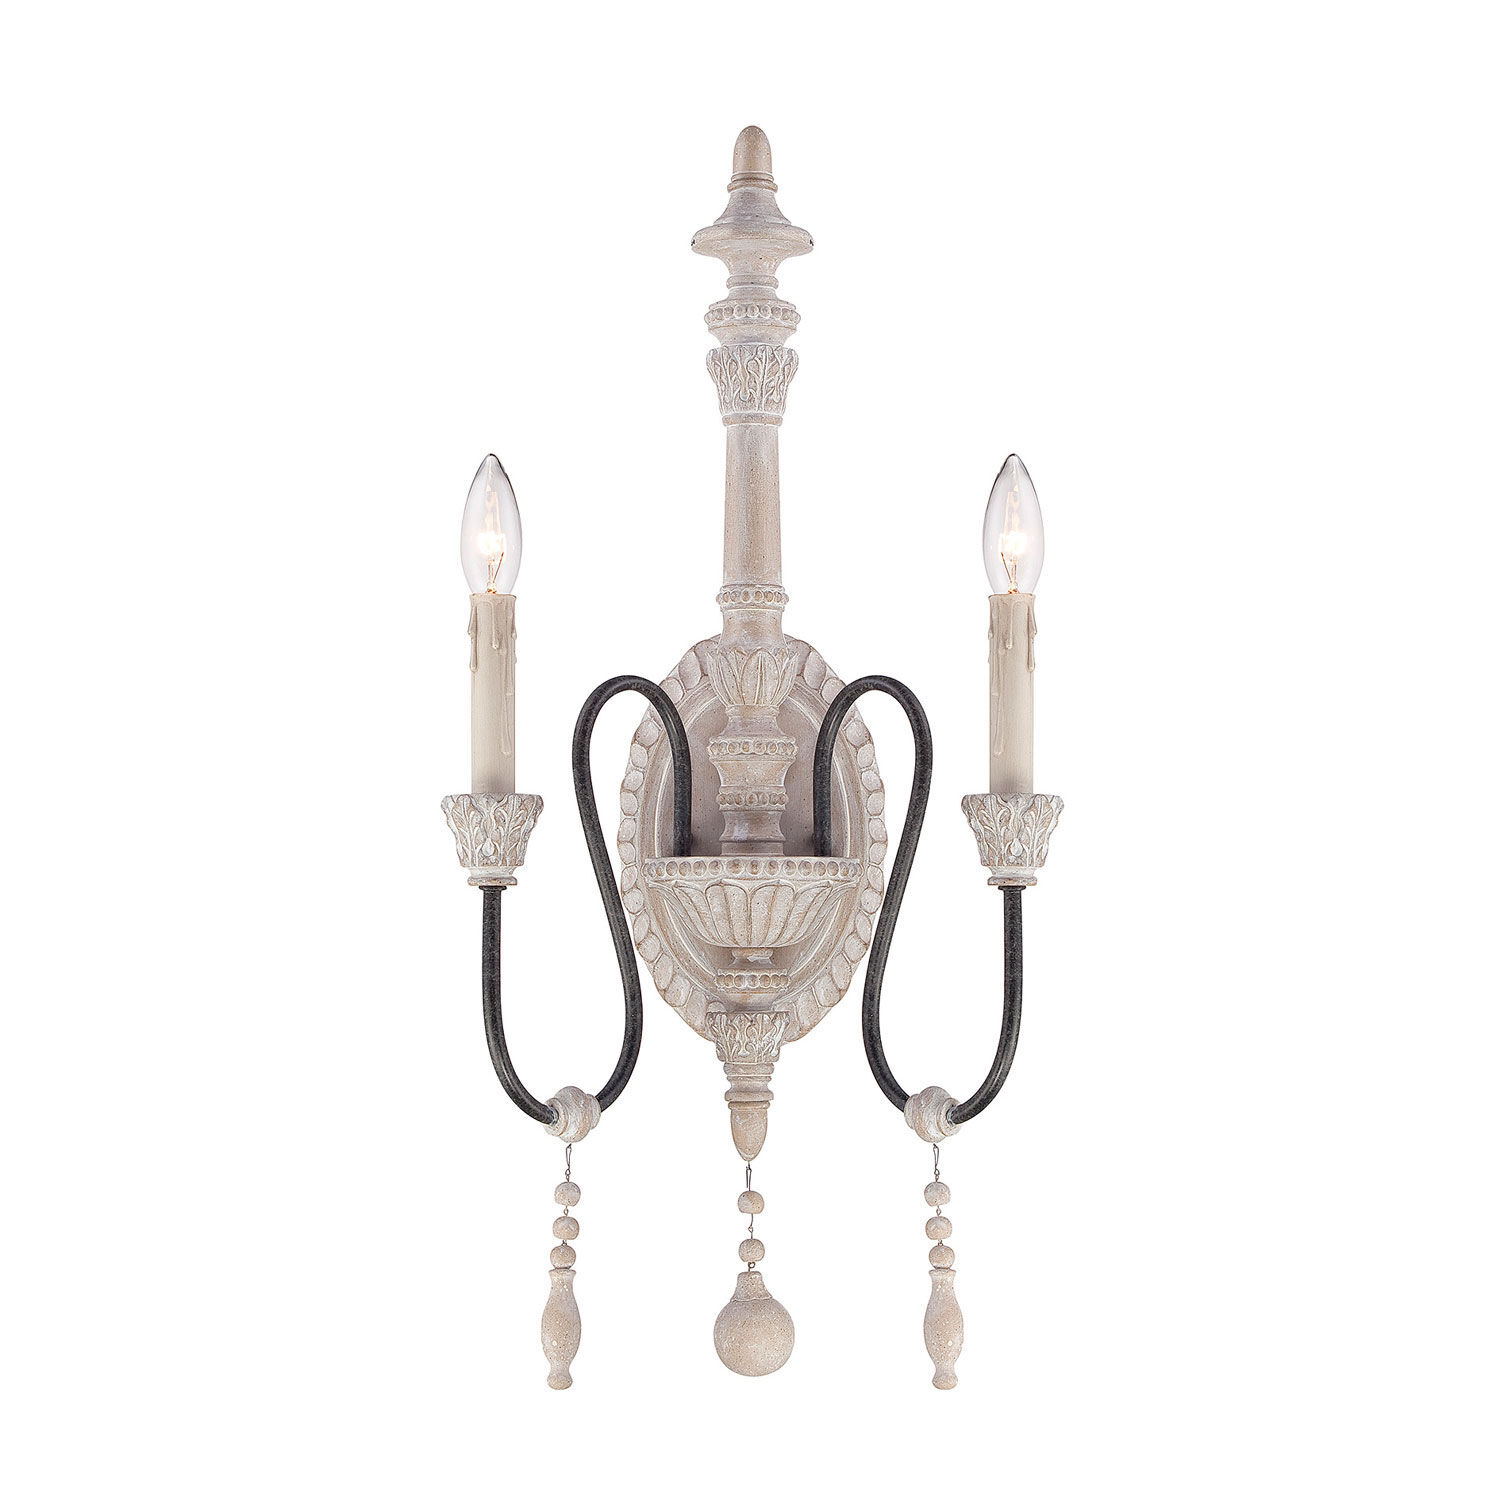 Classic Lighting 5752 AGB IRC Parisian Sconce with Wall Bracket